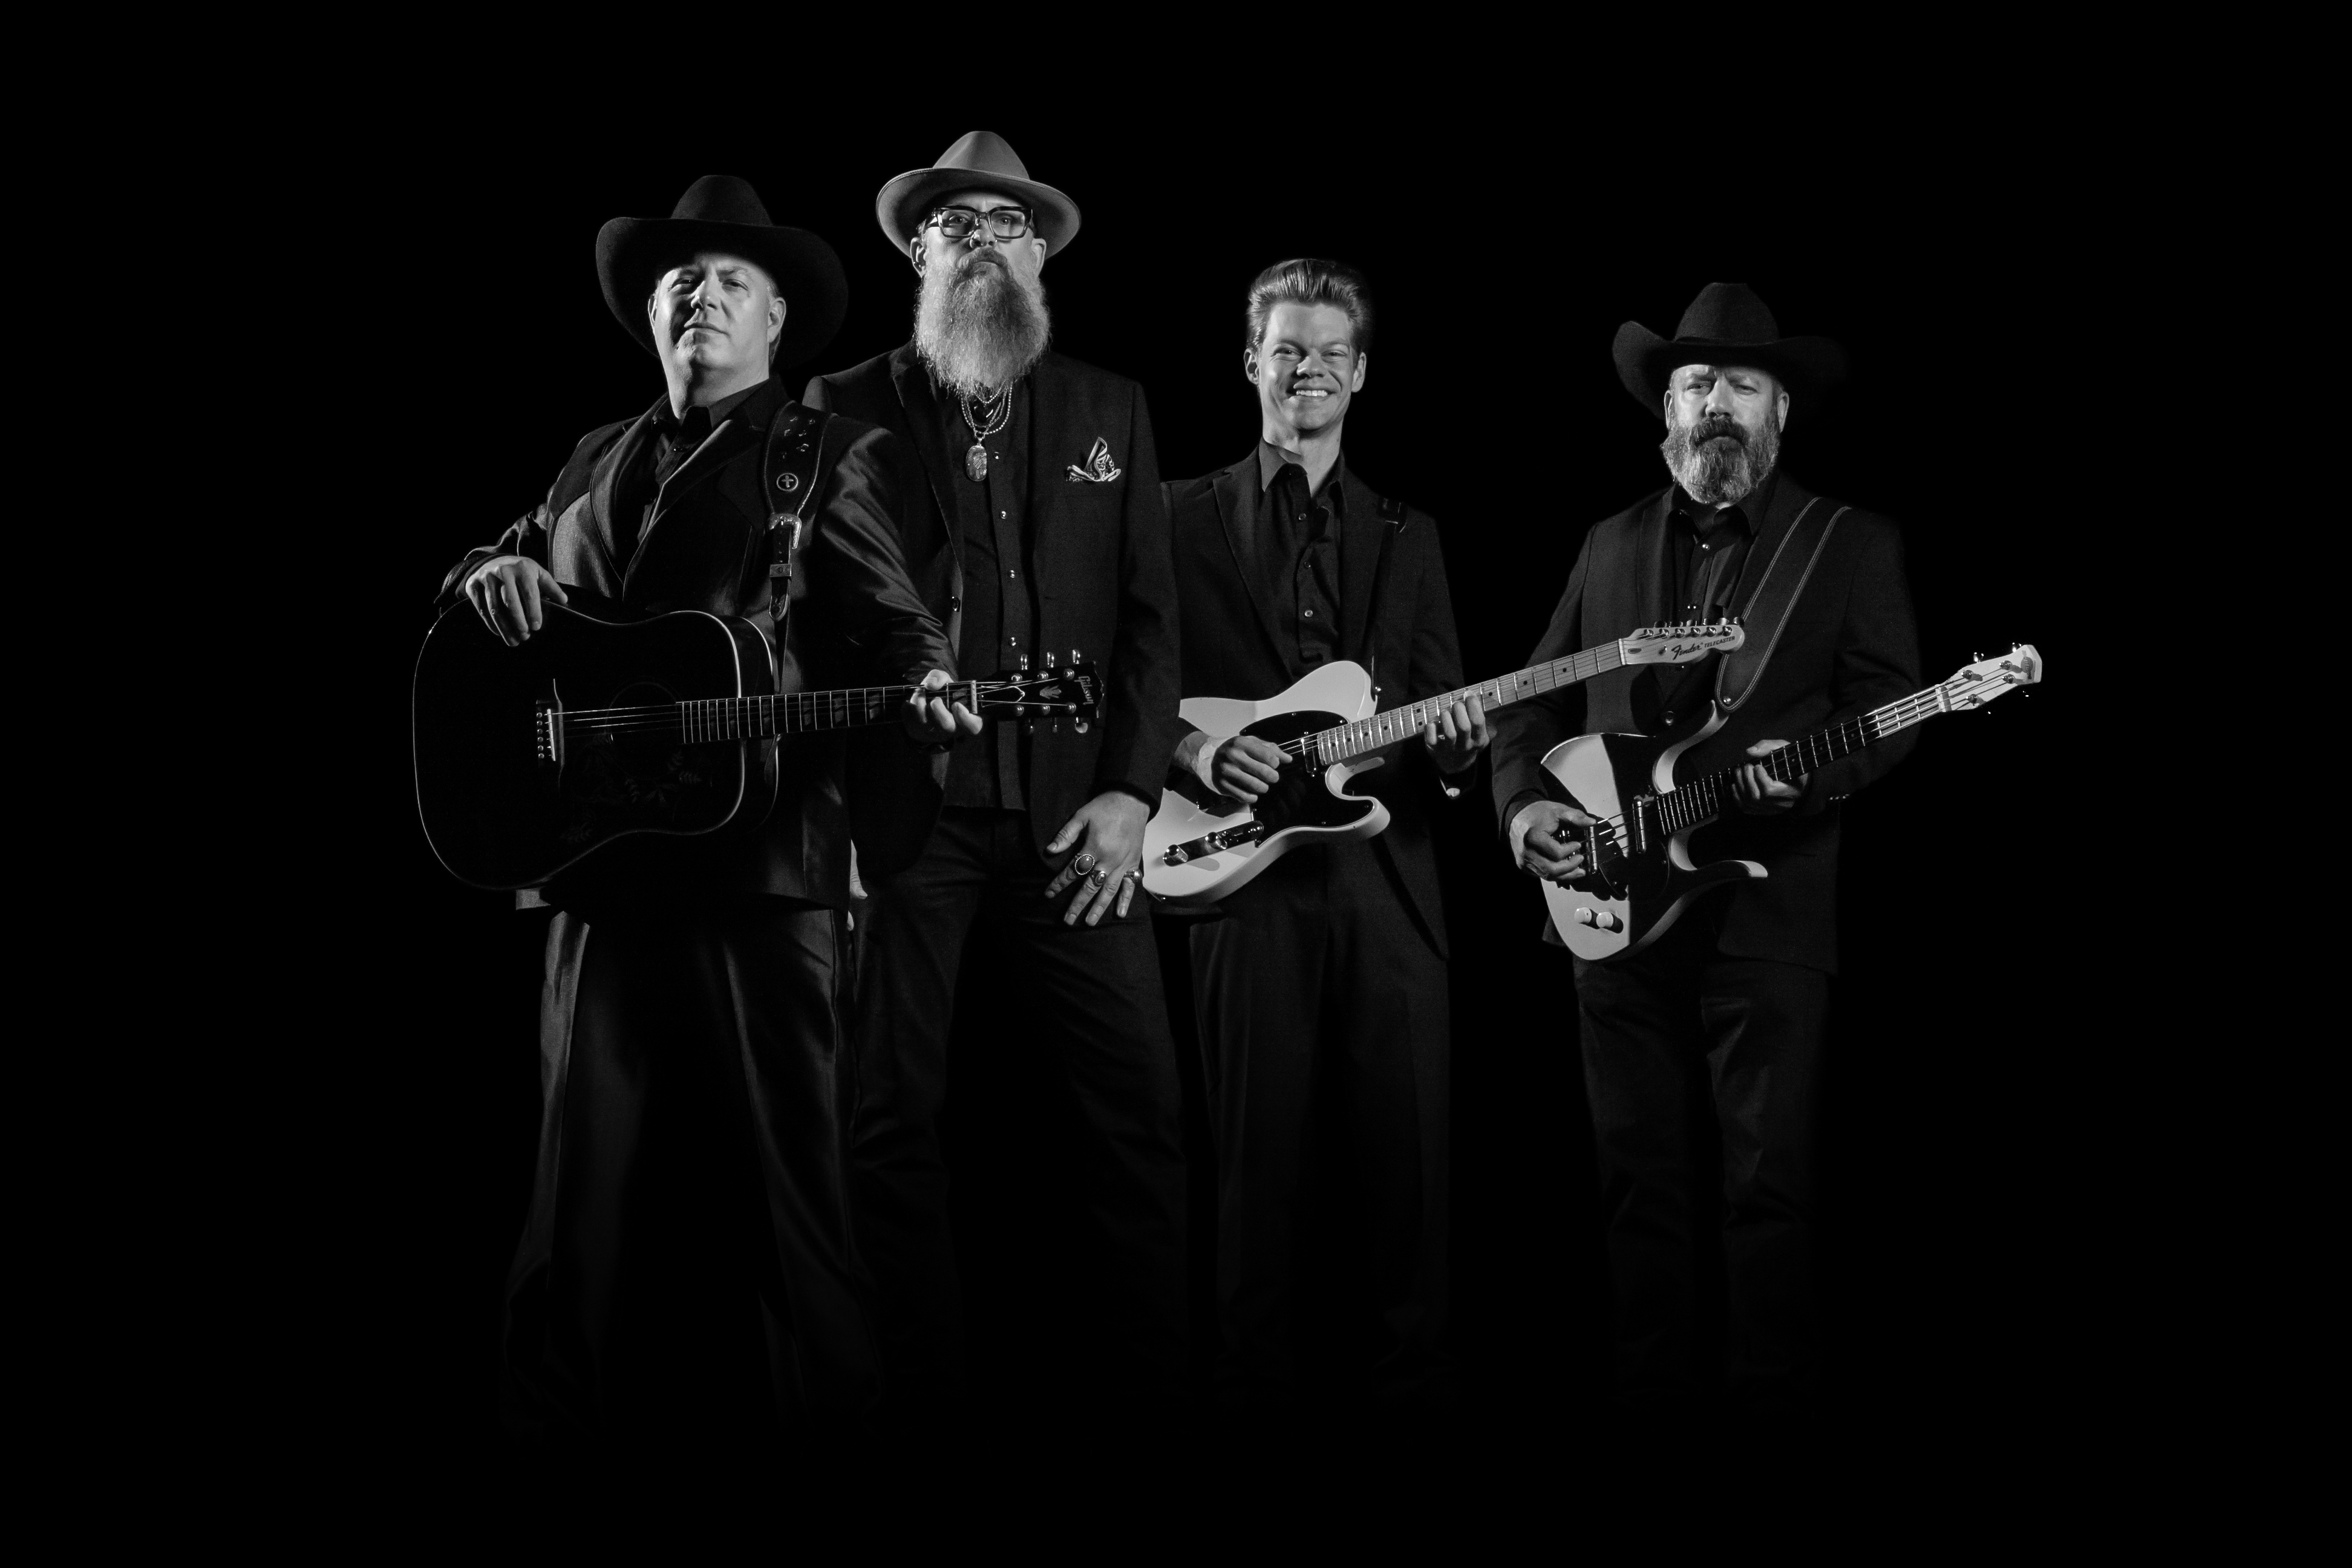  Church of Cash Embody the Mystique and Resonance of Johnny Cash in Concert